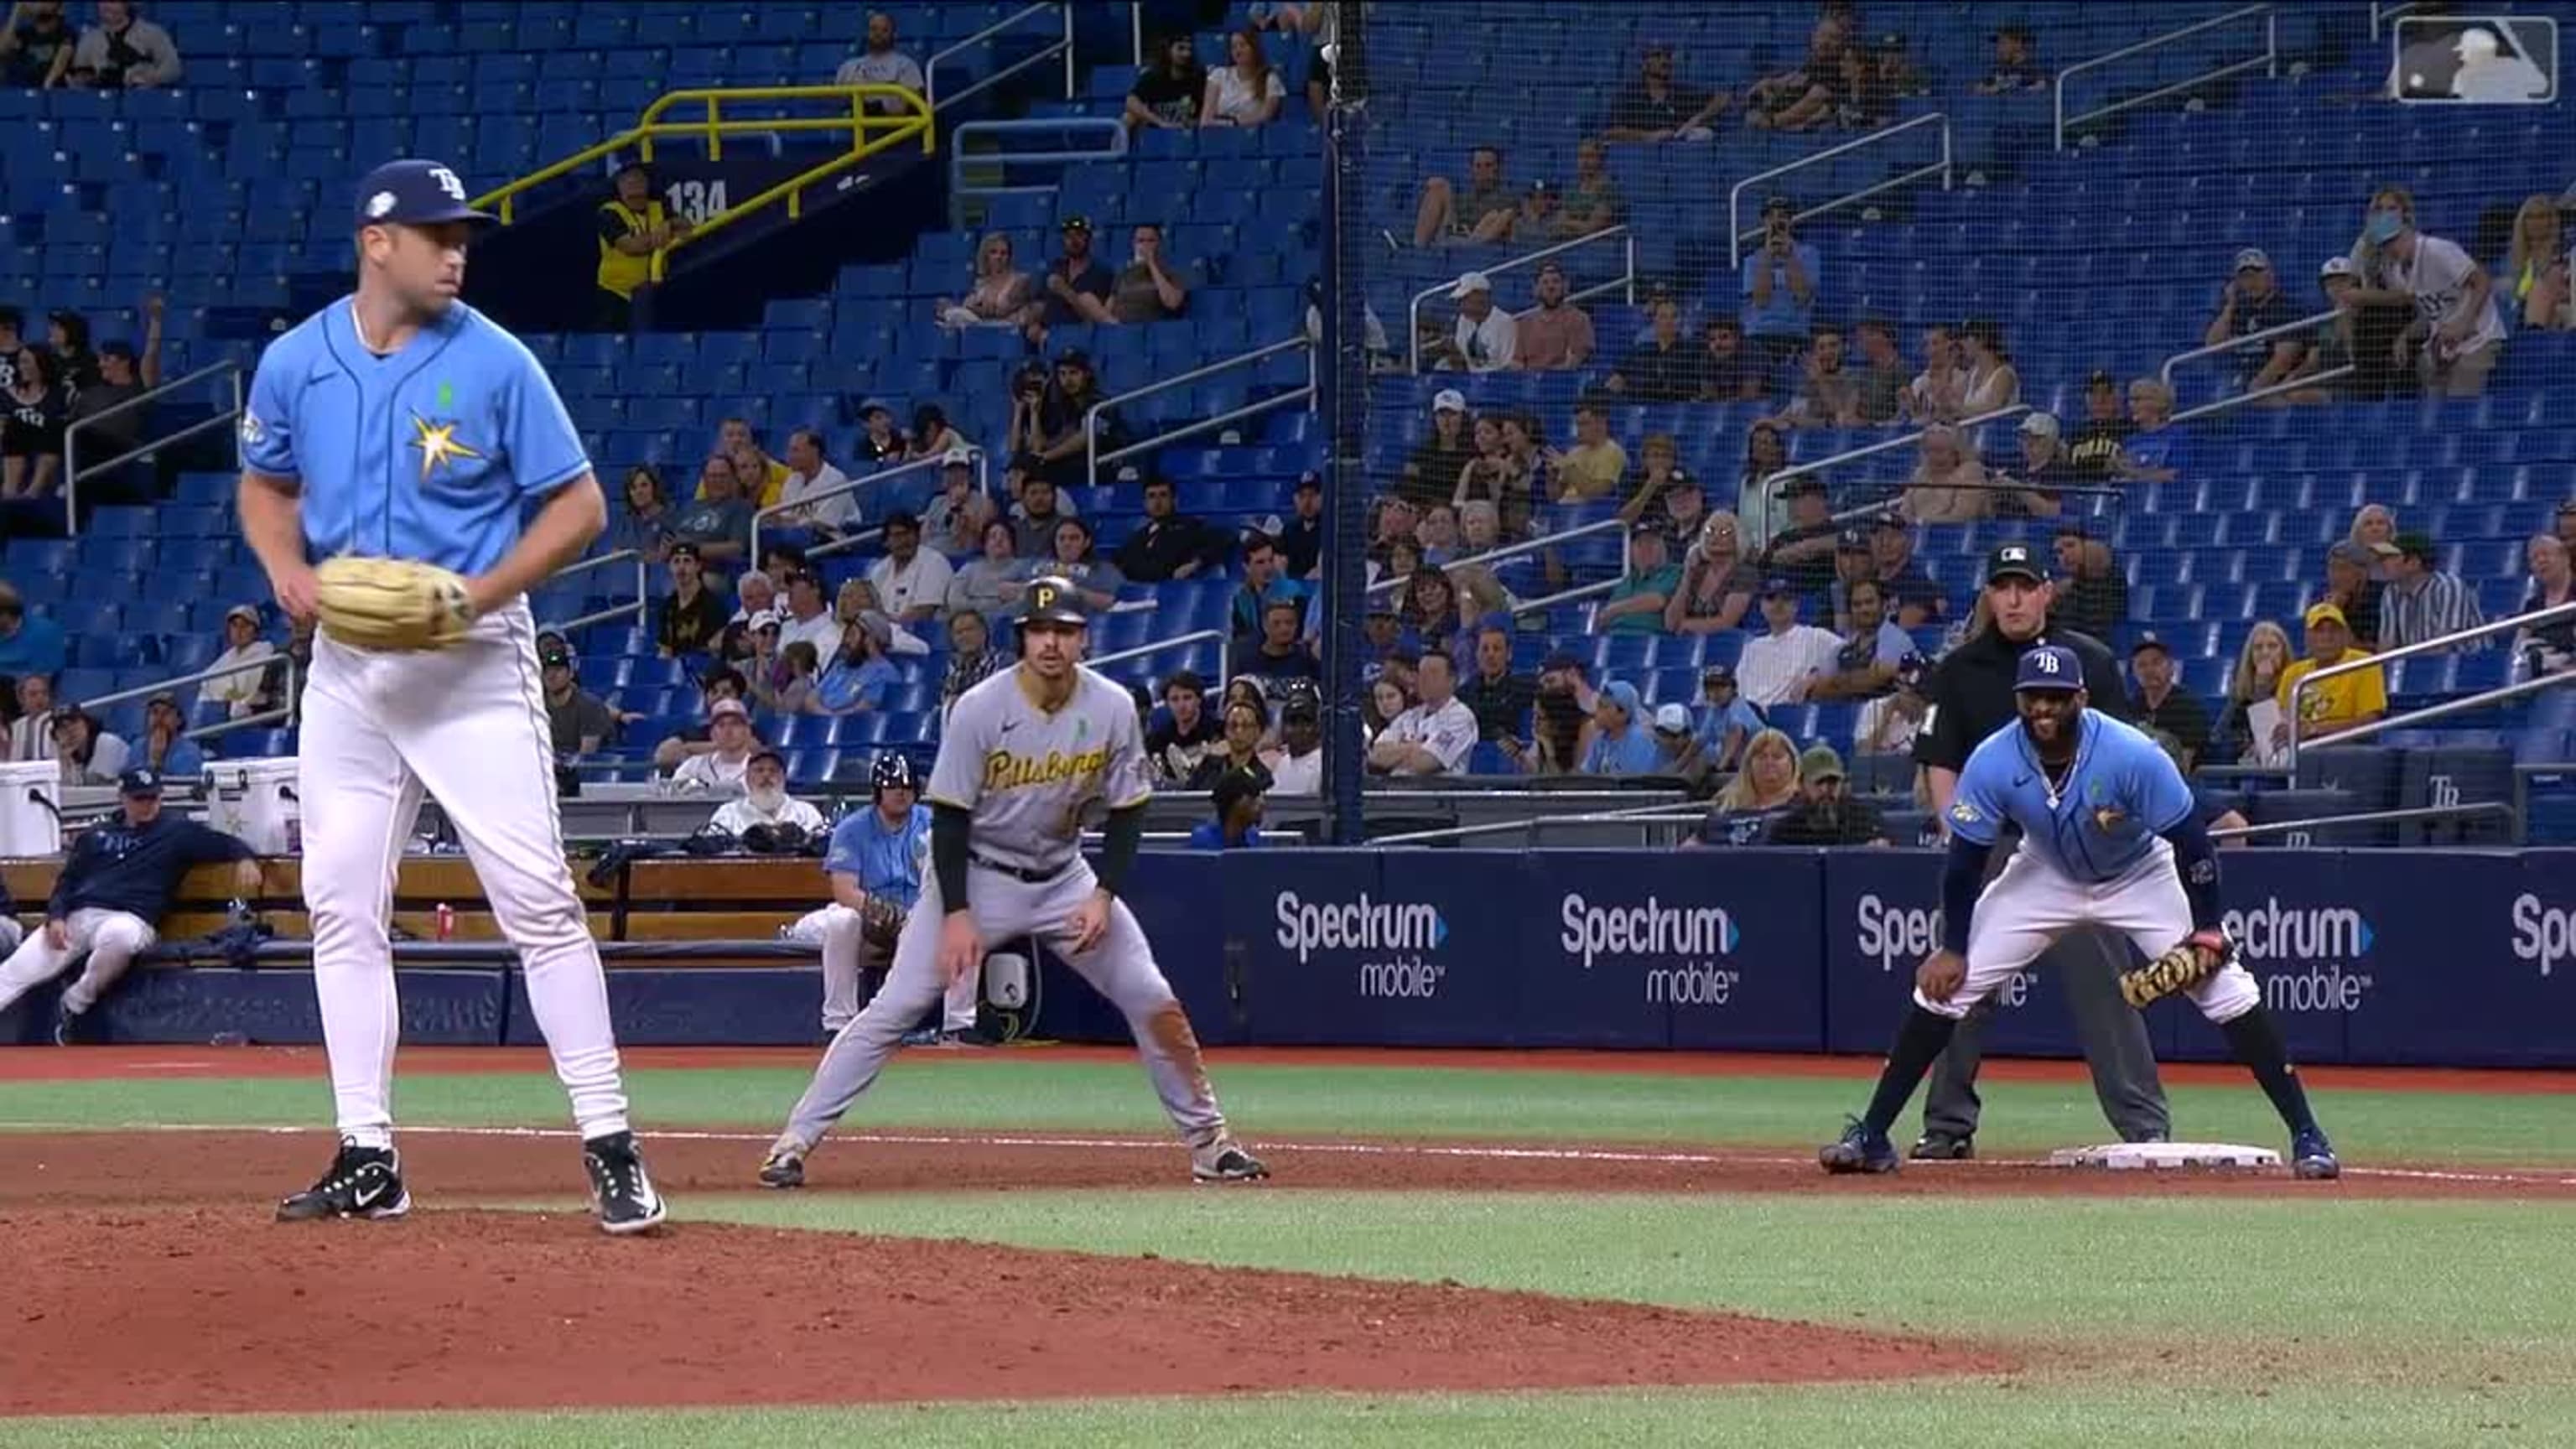 Ramirez homers as Rays beat Pirates in matchup of top teams